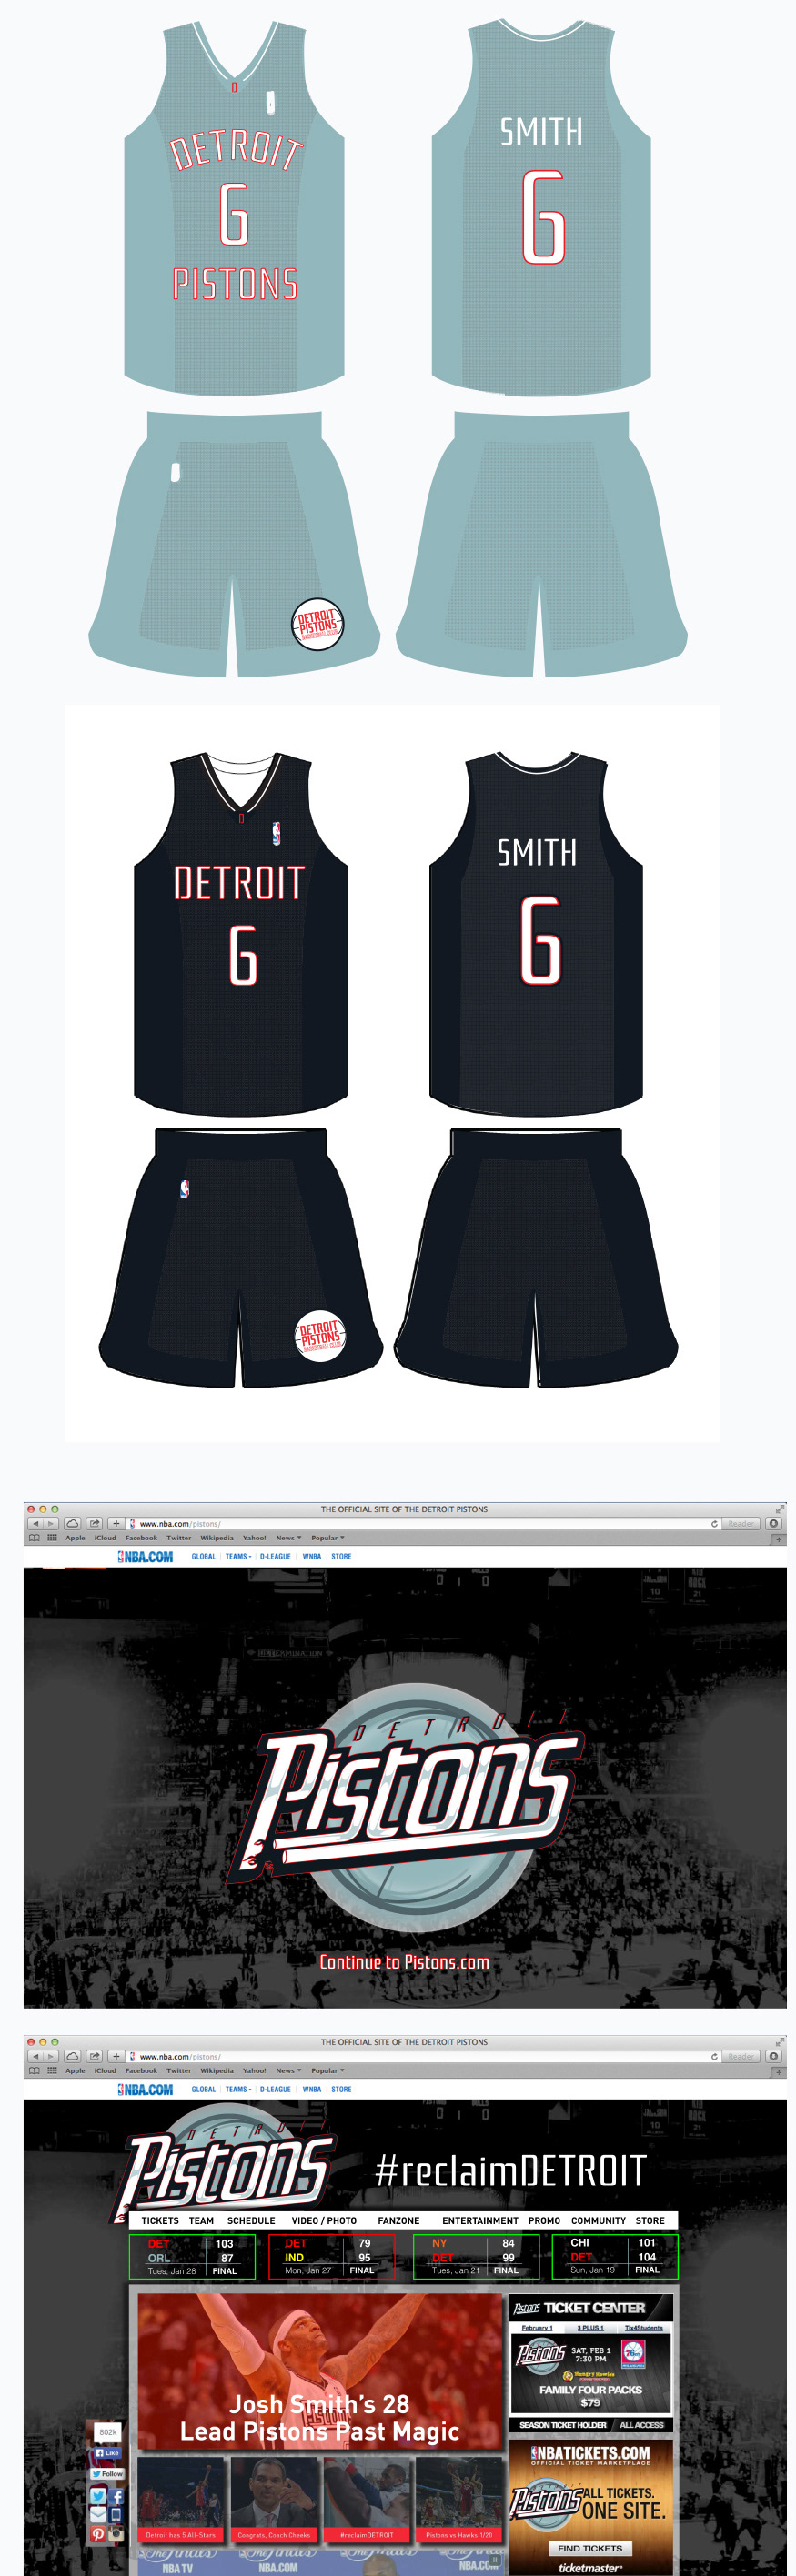 sports detroit pistons Jerseys design redesign new indianapolis indiana